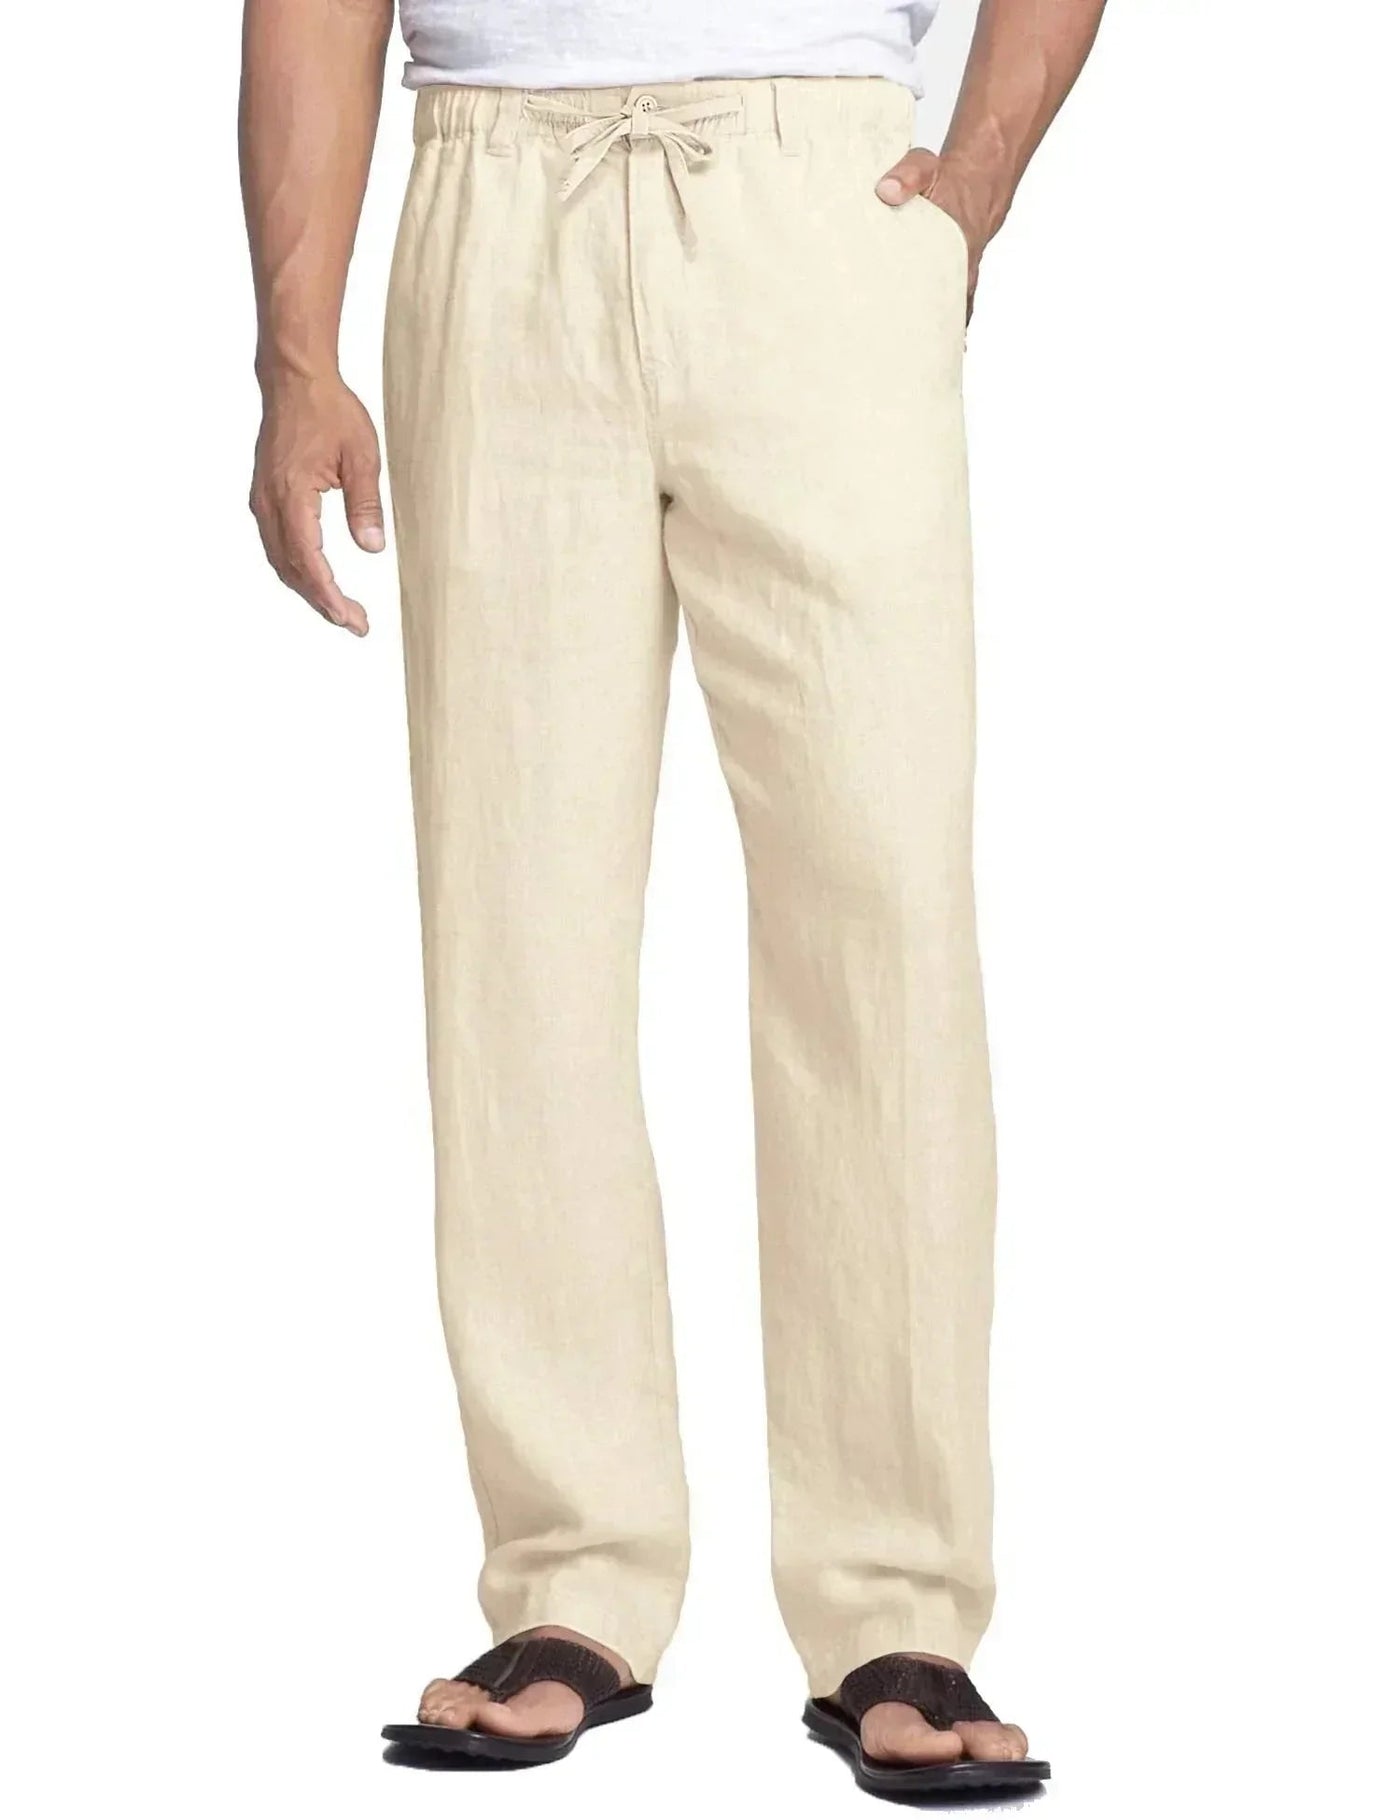 Coofandy Casual Cotton Style Trousers (US Only) Pants coofandy Light Khaki S 